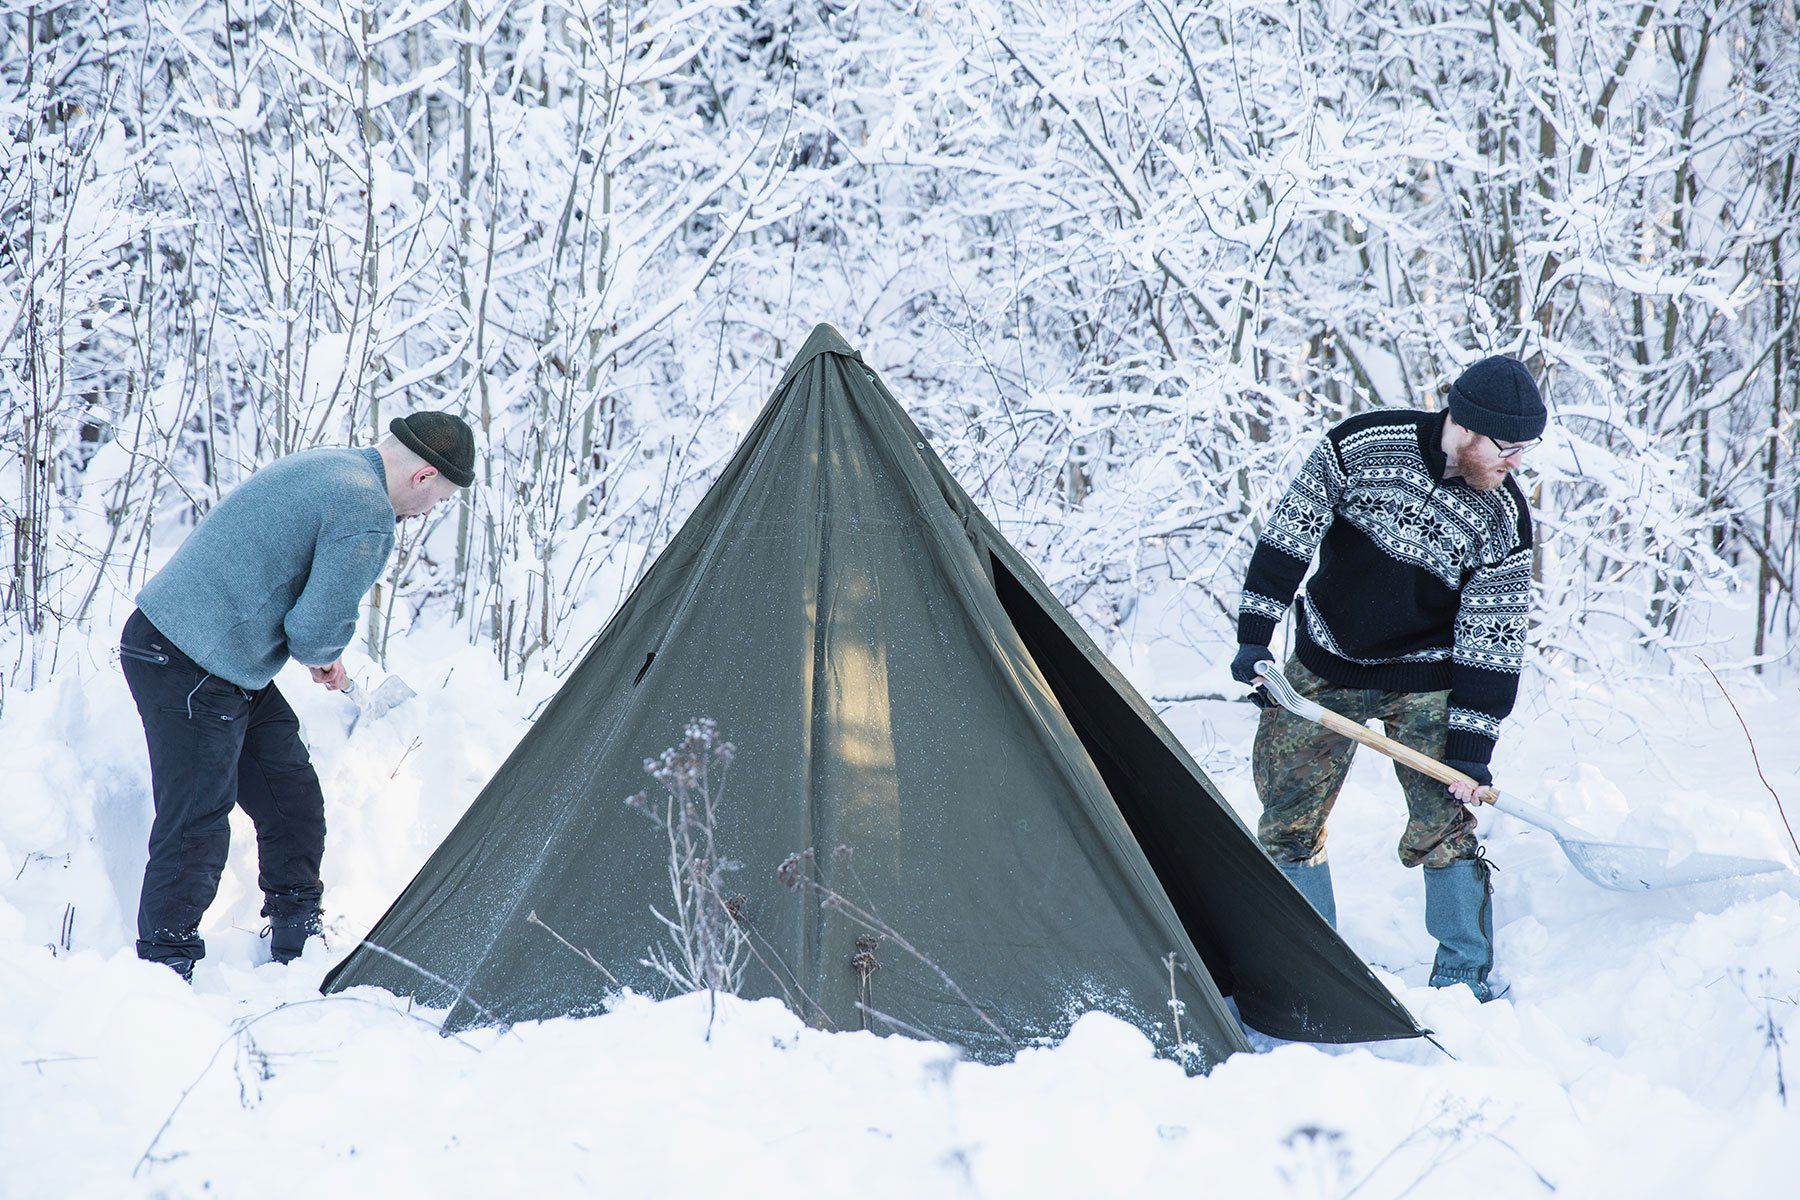 Two guys at a snowy forest edge on either side of a tent set up in the snow, shoveling snow from around the tent.